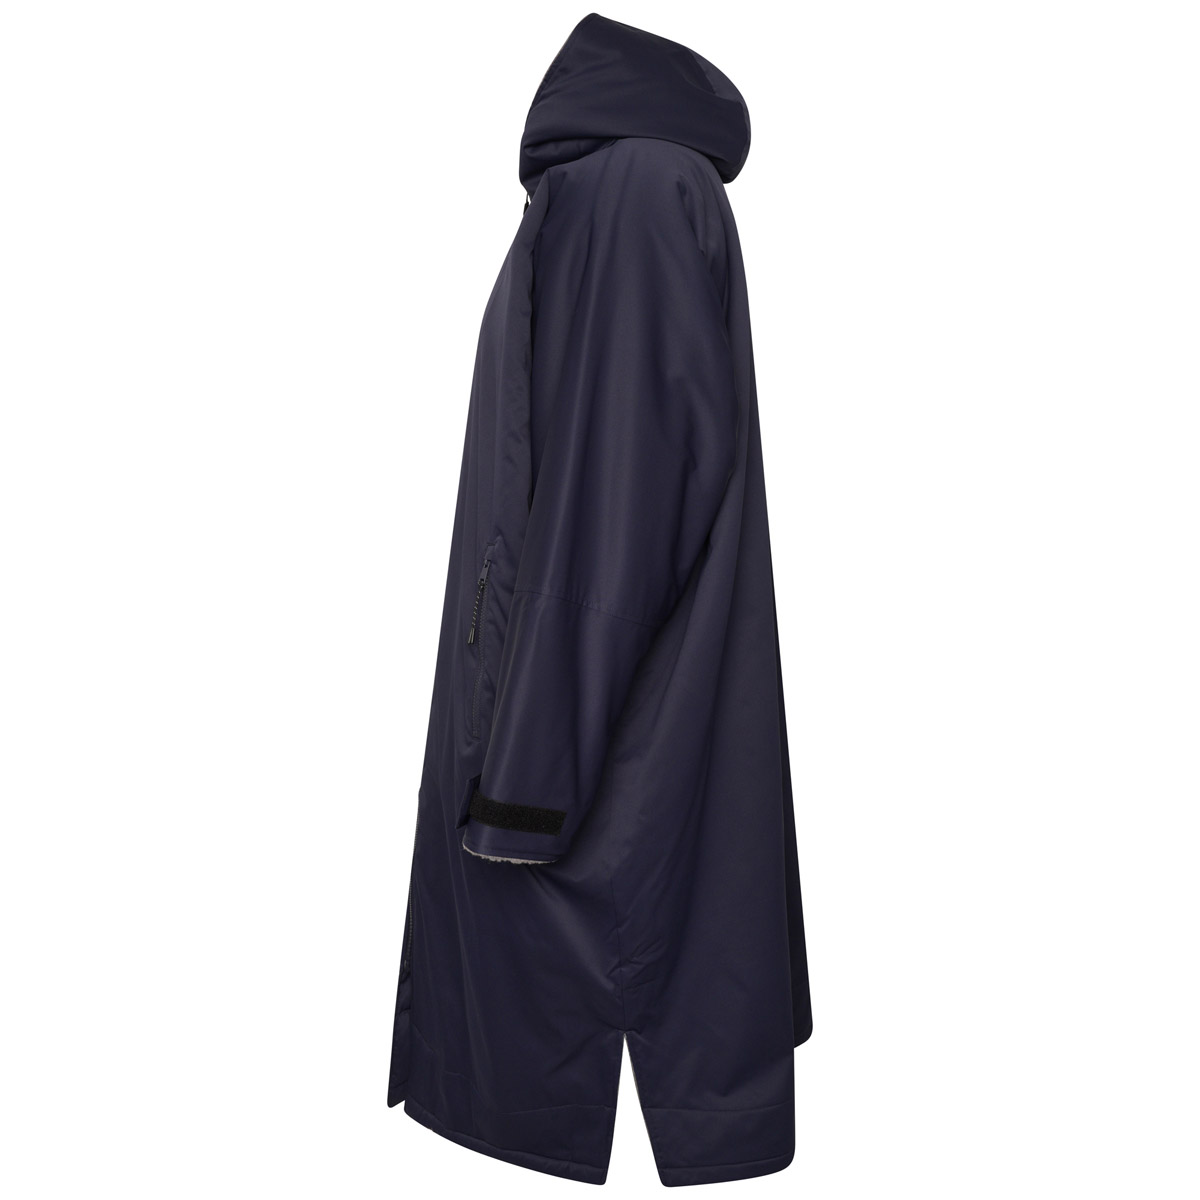 THERMAL ROBE NAVY SIDE